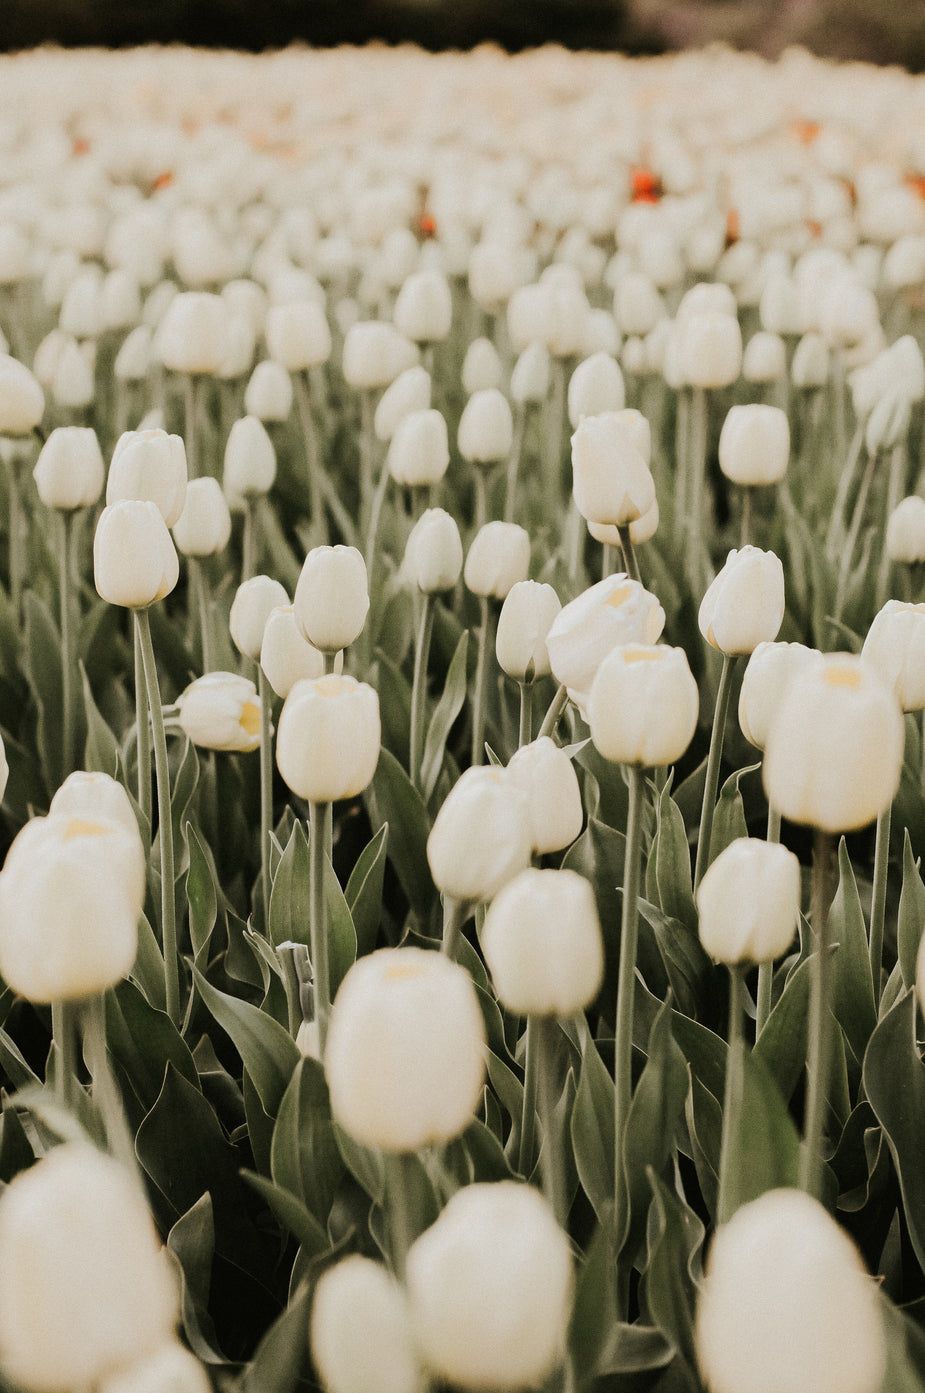 A field of white tulips in the sunshine - Tulip